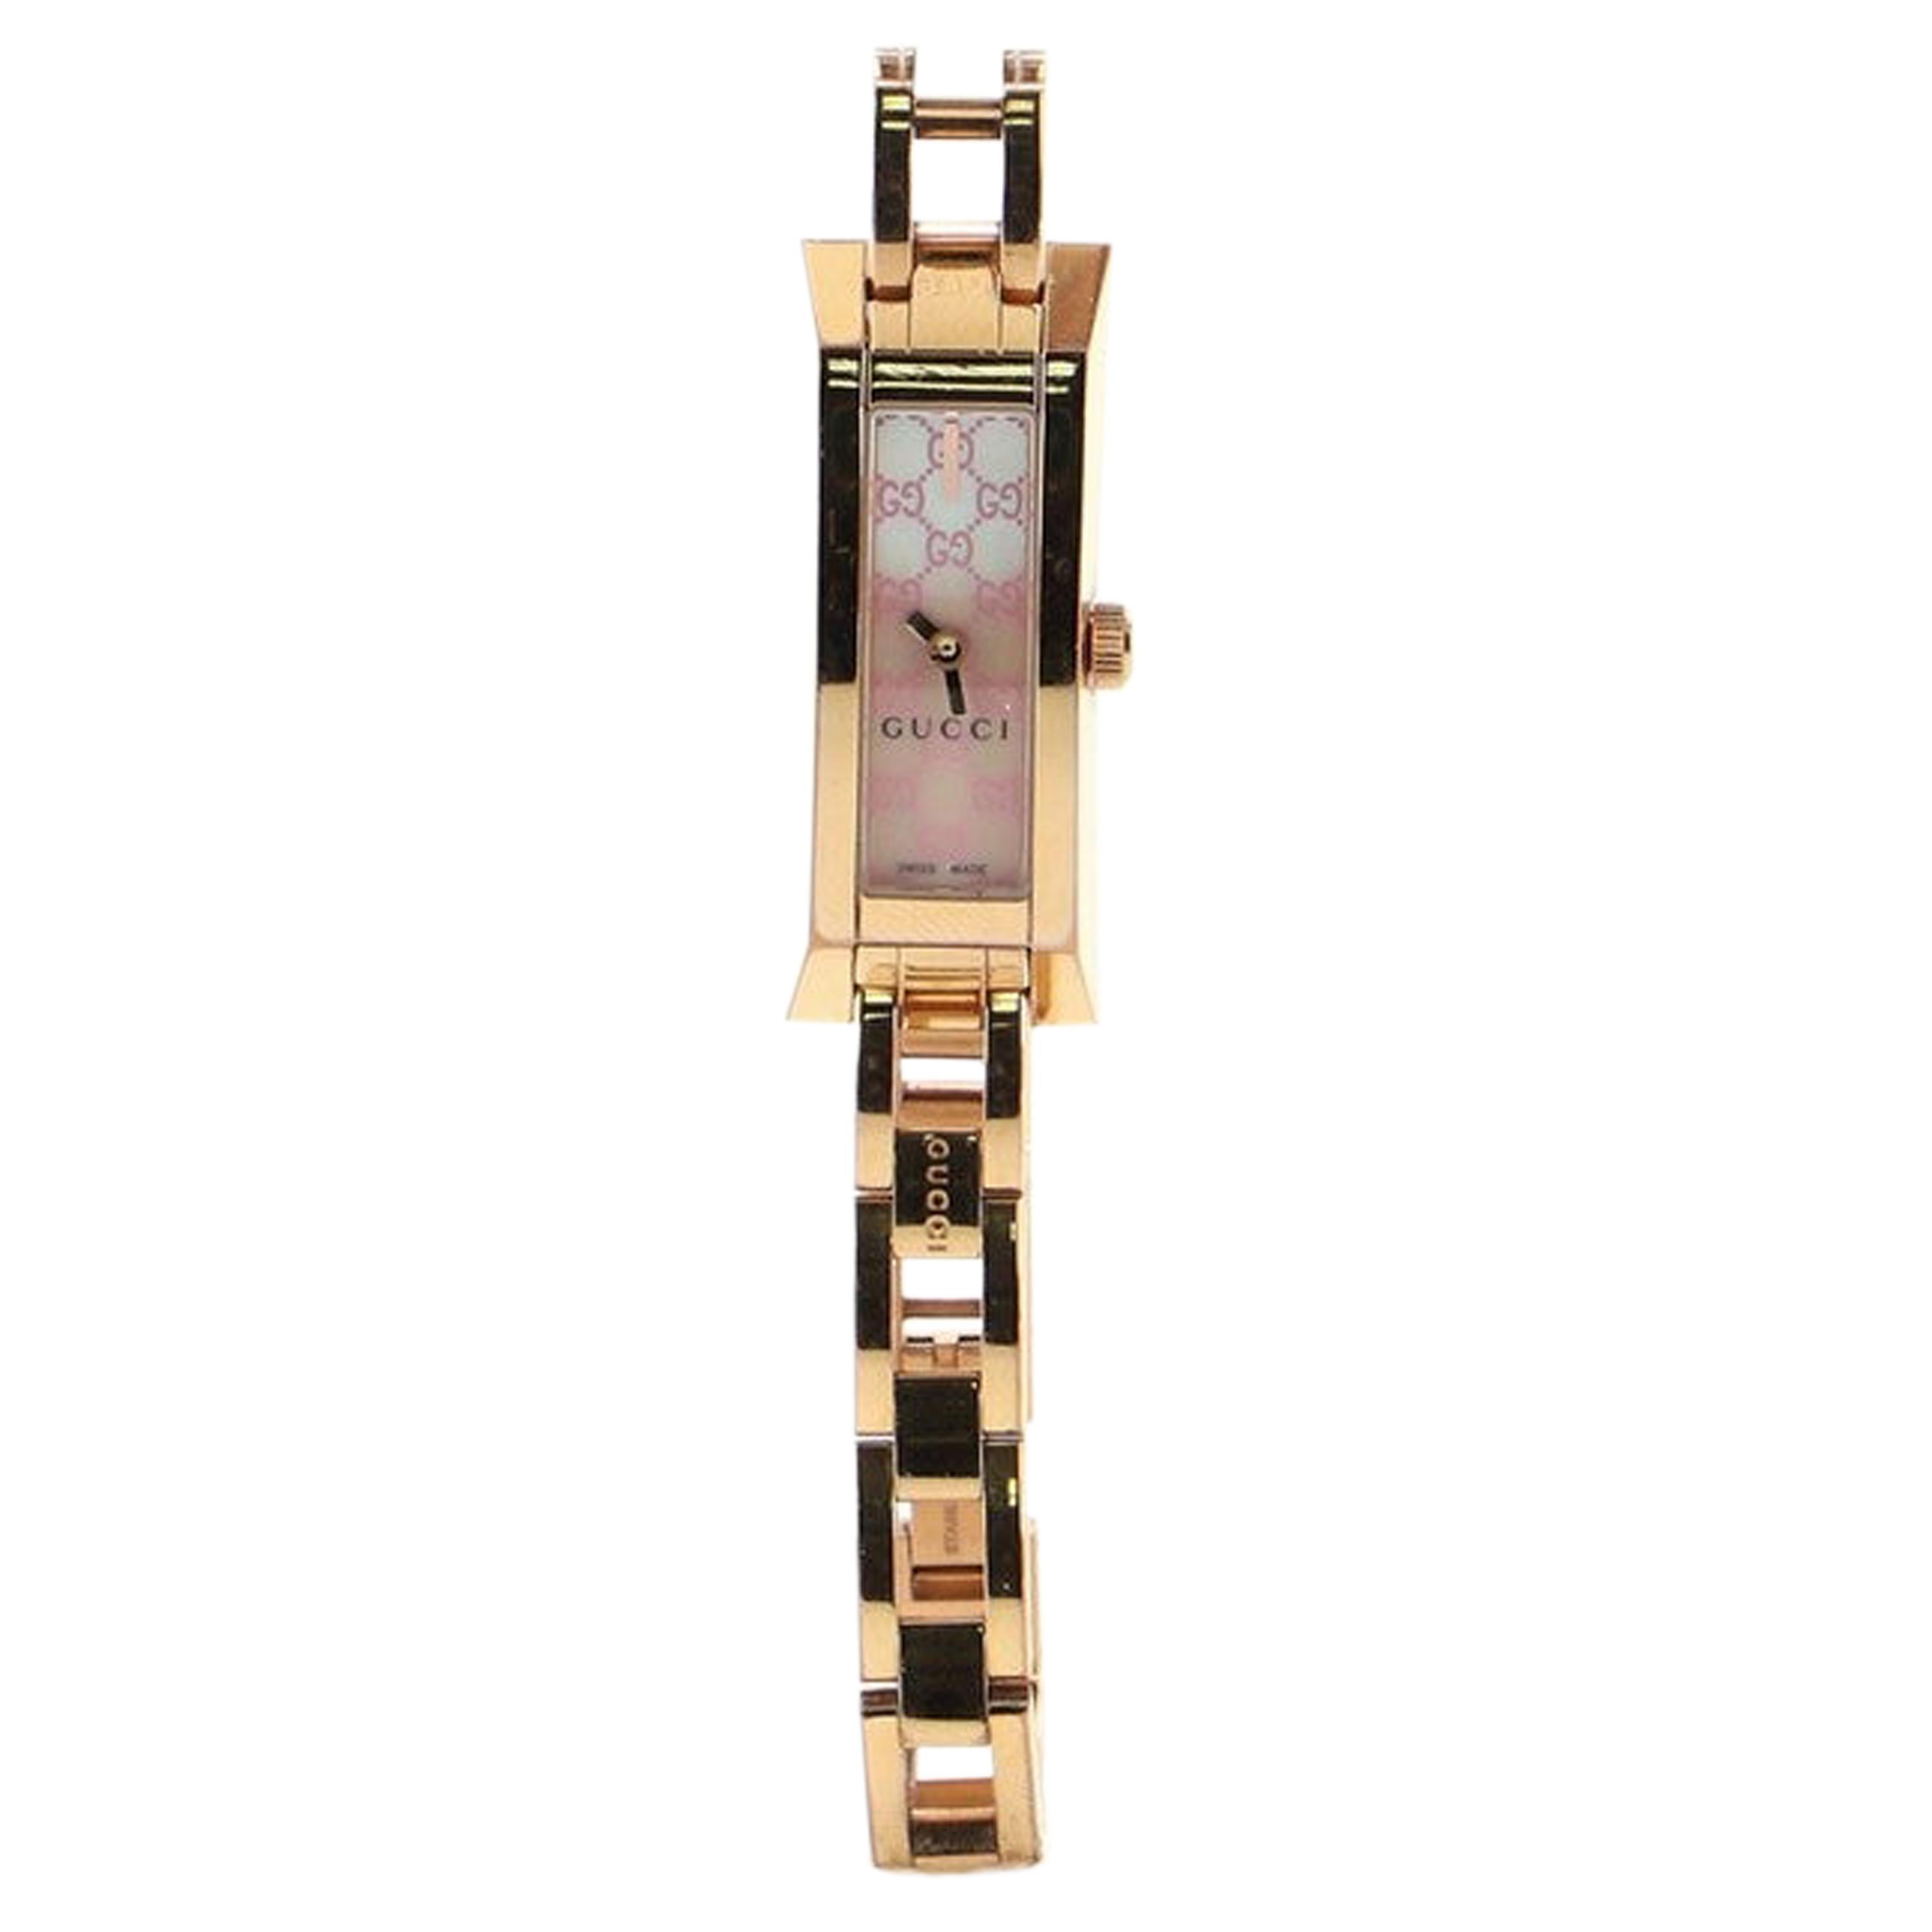 Gucci 3900 Series Quartz Watch Rose Gold-Plated Steel and GG